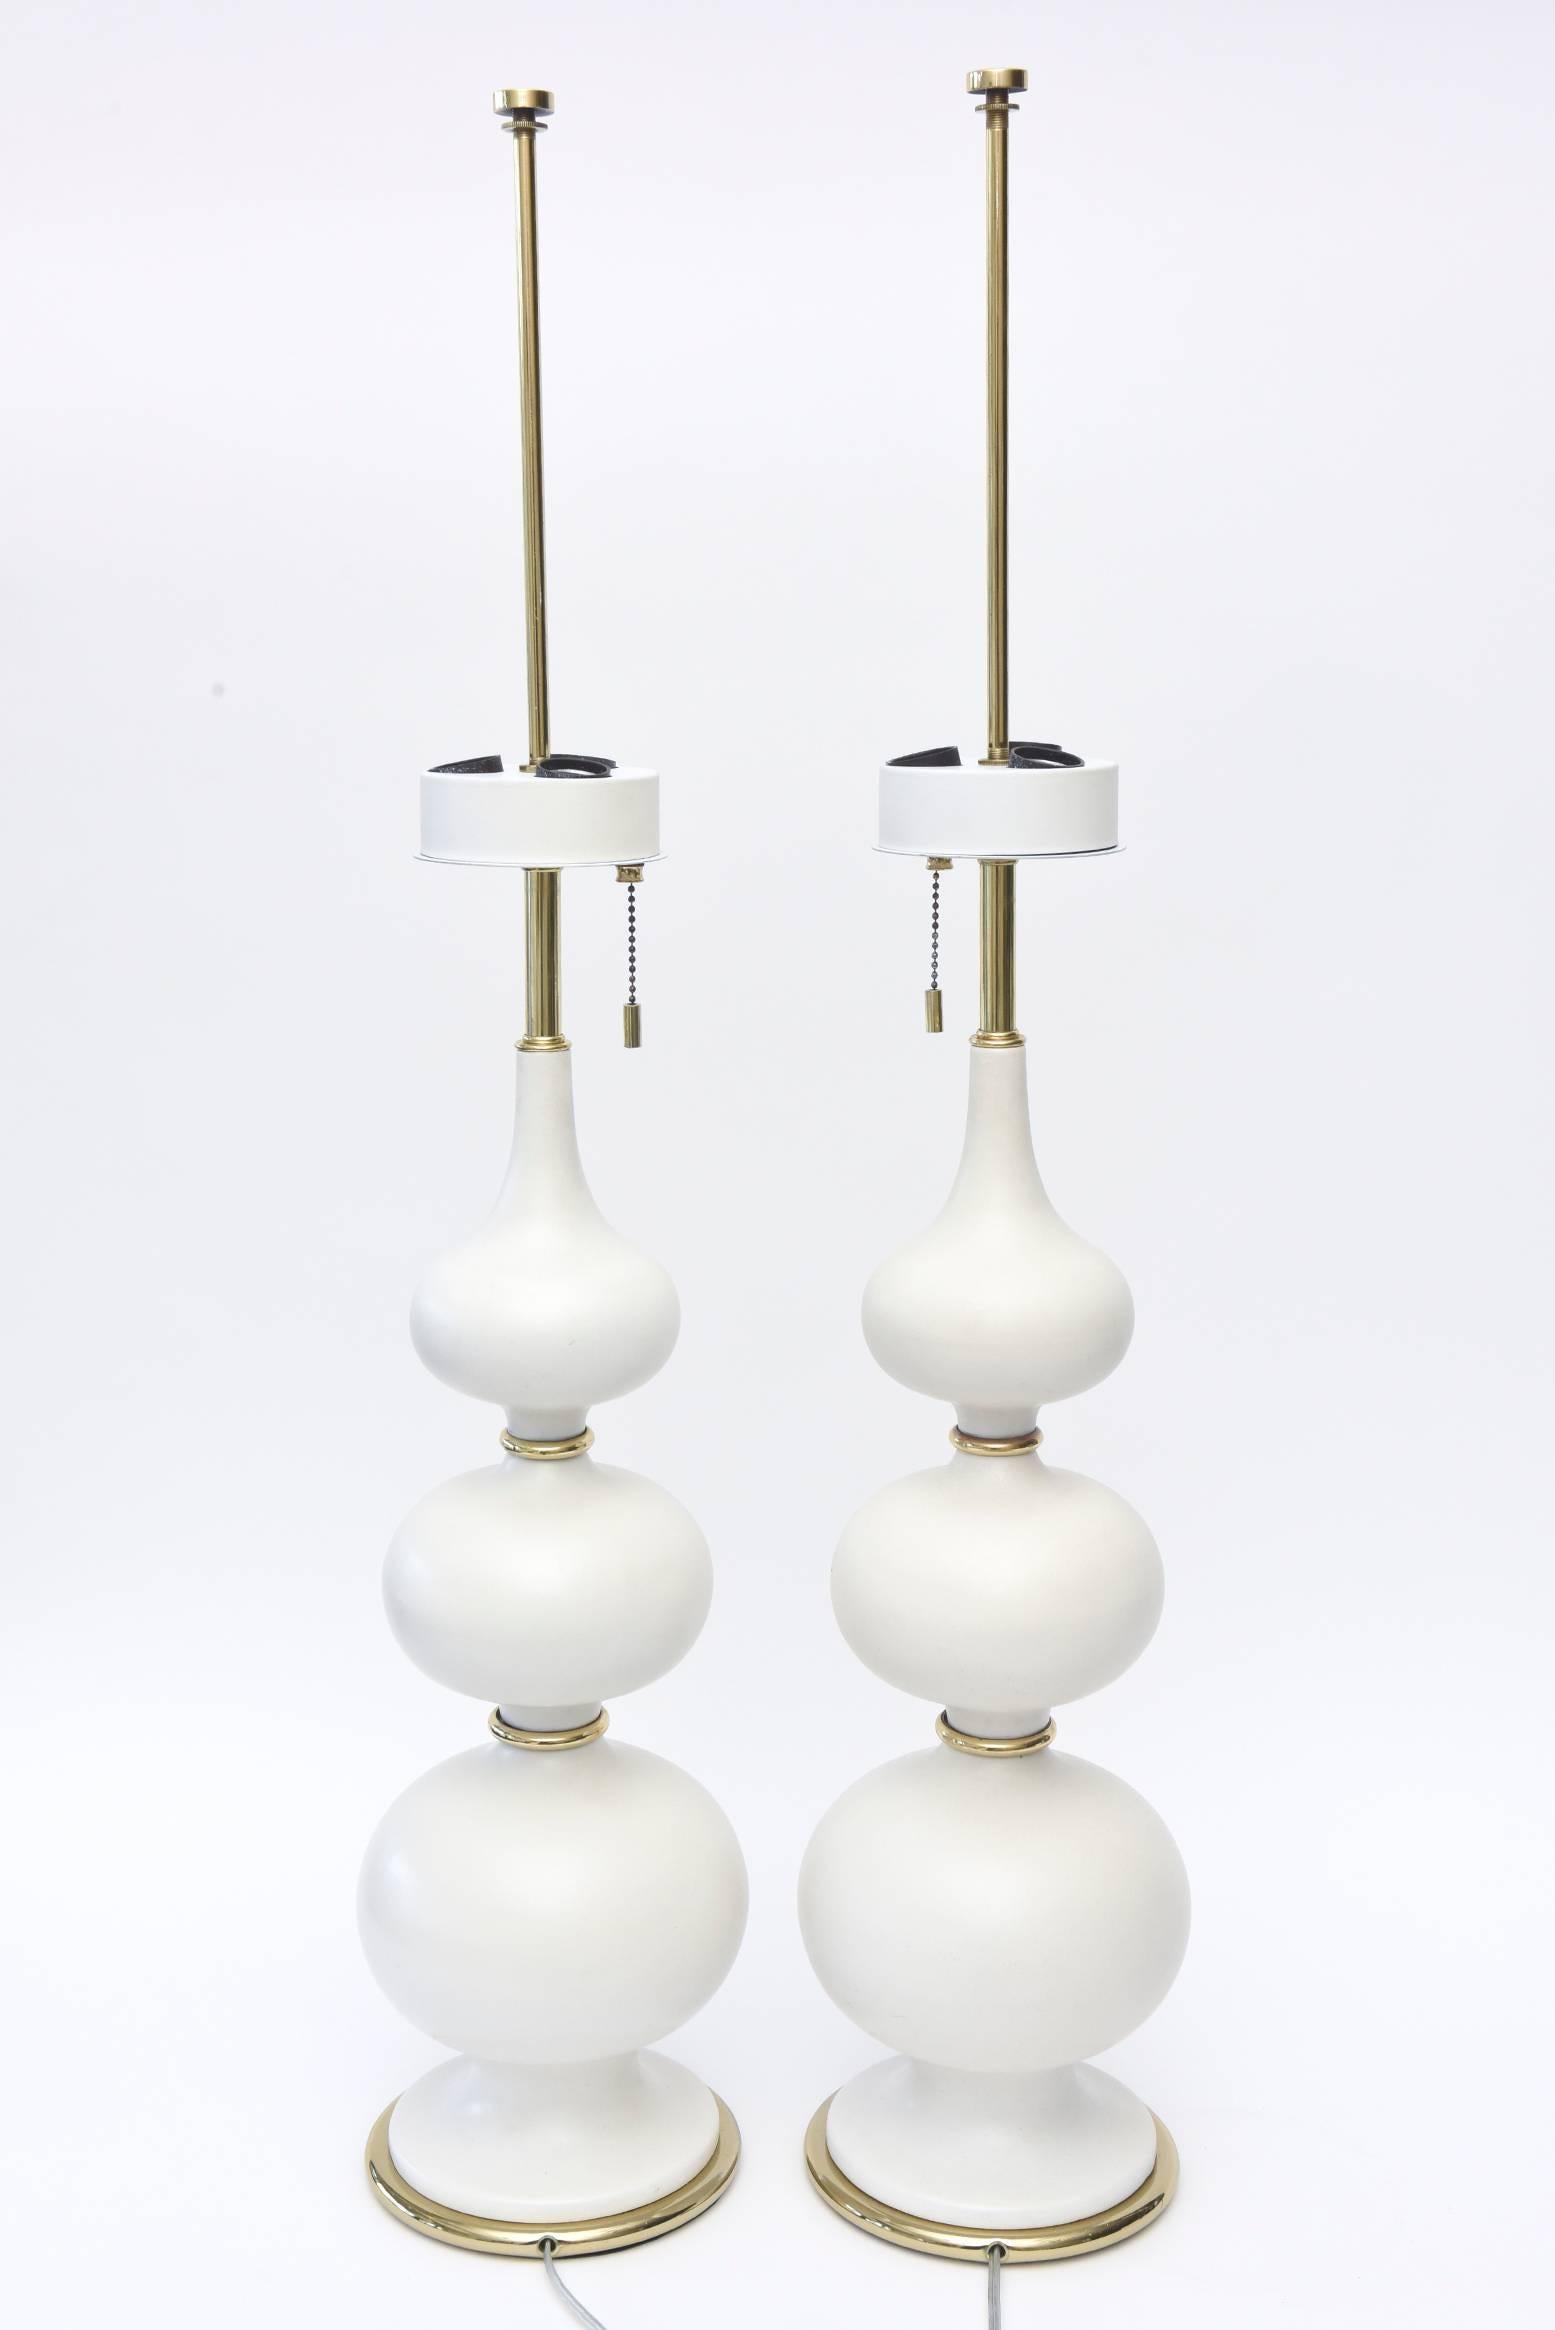  Gerald Thurston White Ceramic and Brass Lamps Mid-Century Modern Pair Of 3